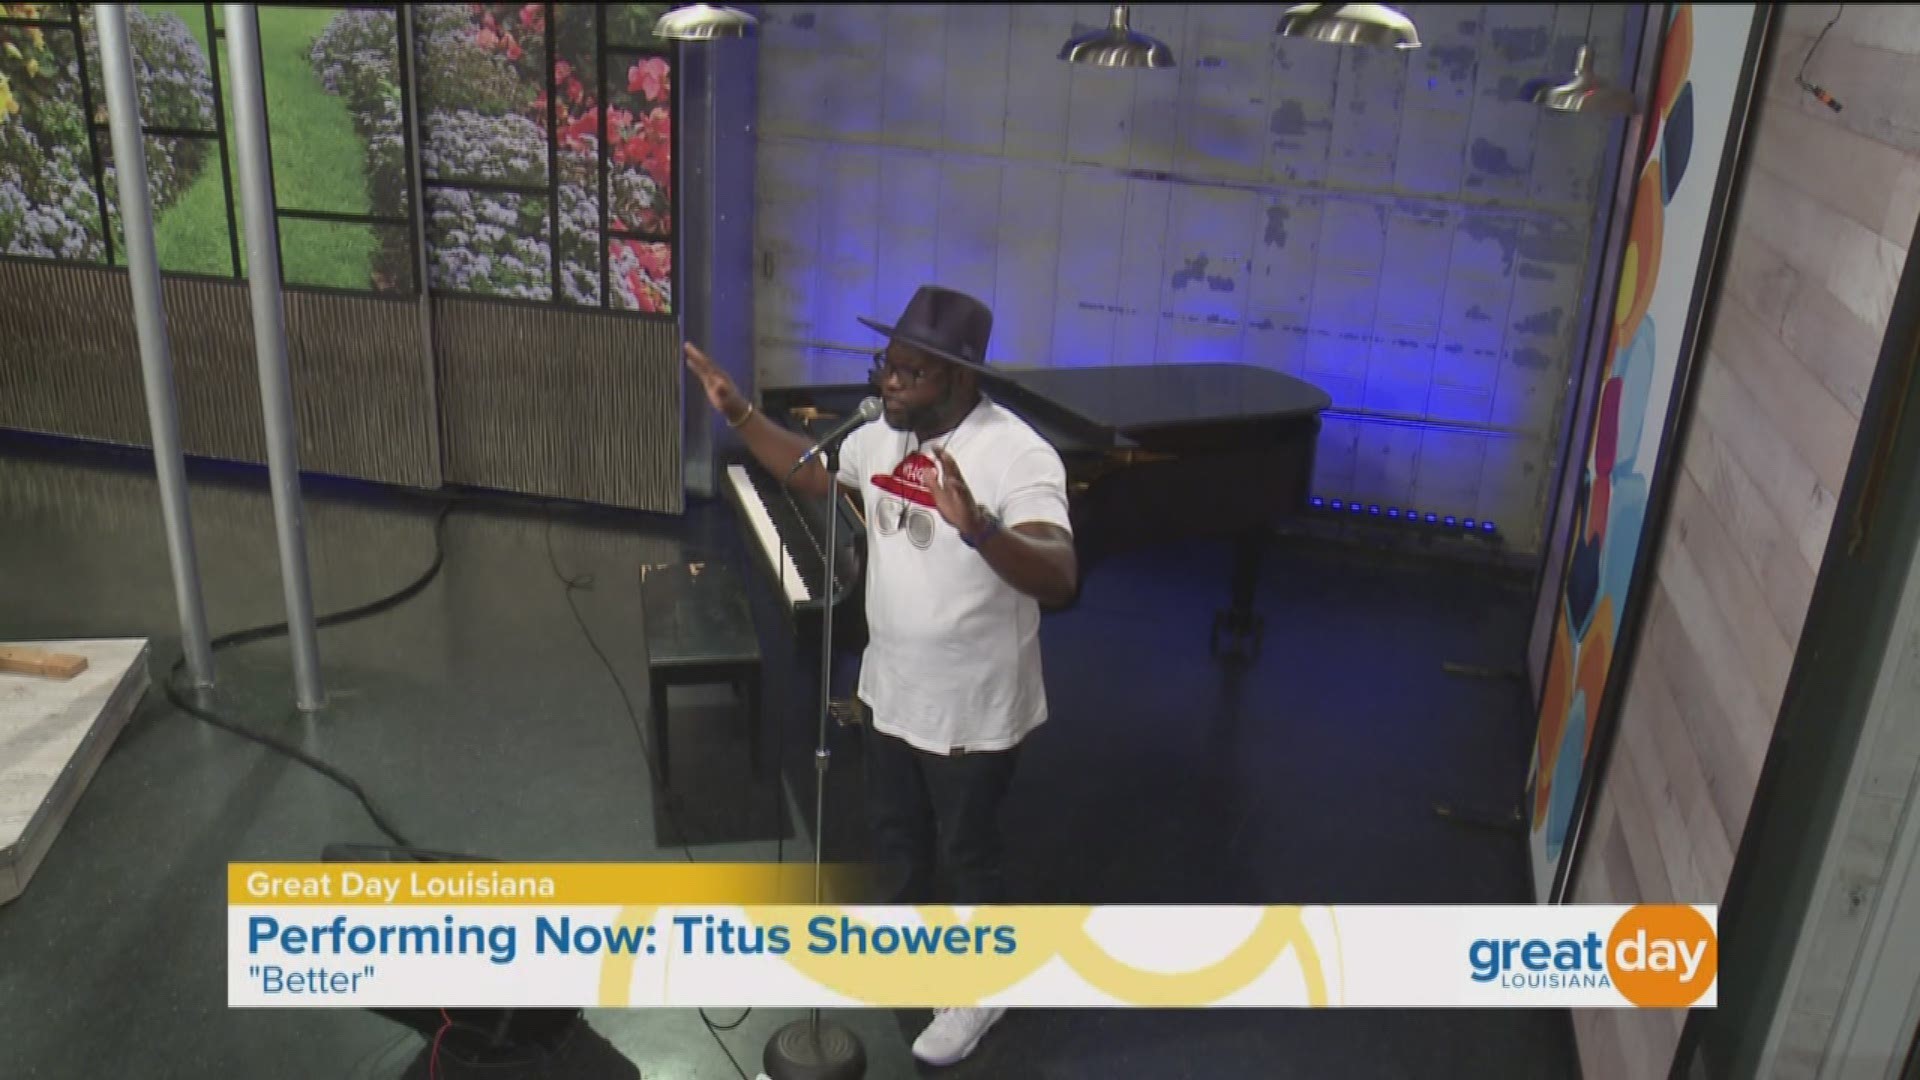 He started singing gospel with his siblings under a decade ago, now he sits on the Billboard 100 Top Gospel Sales Chart. Joining us on Great Day is Titus Showers.